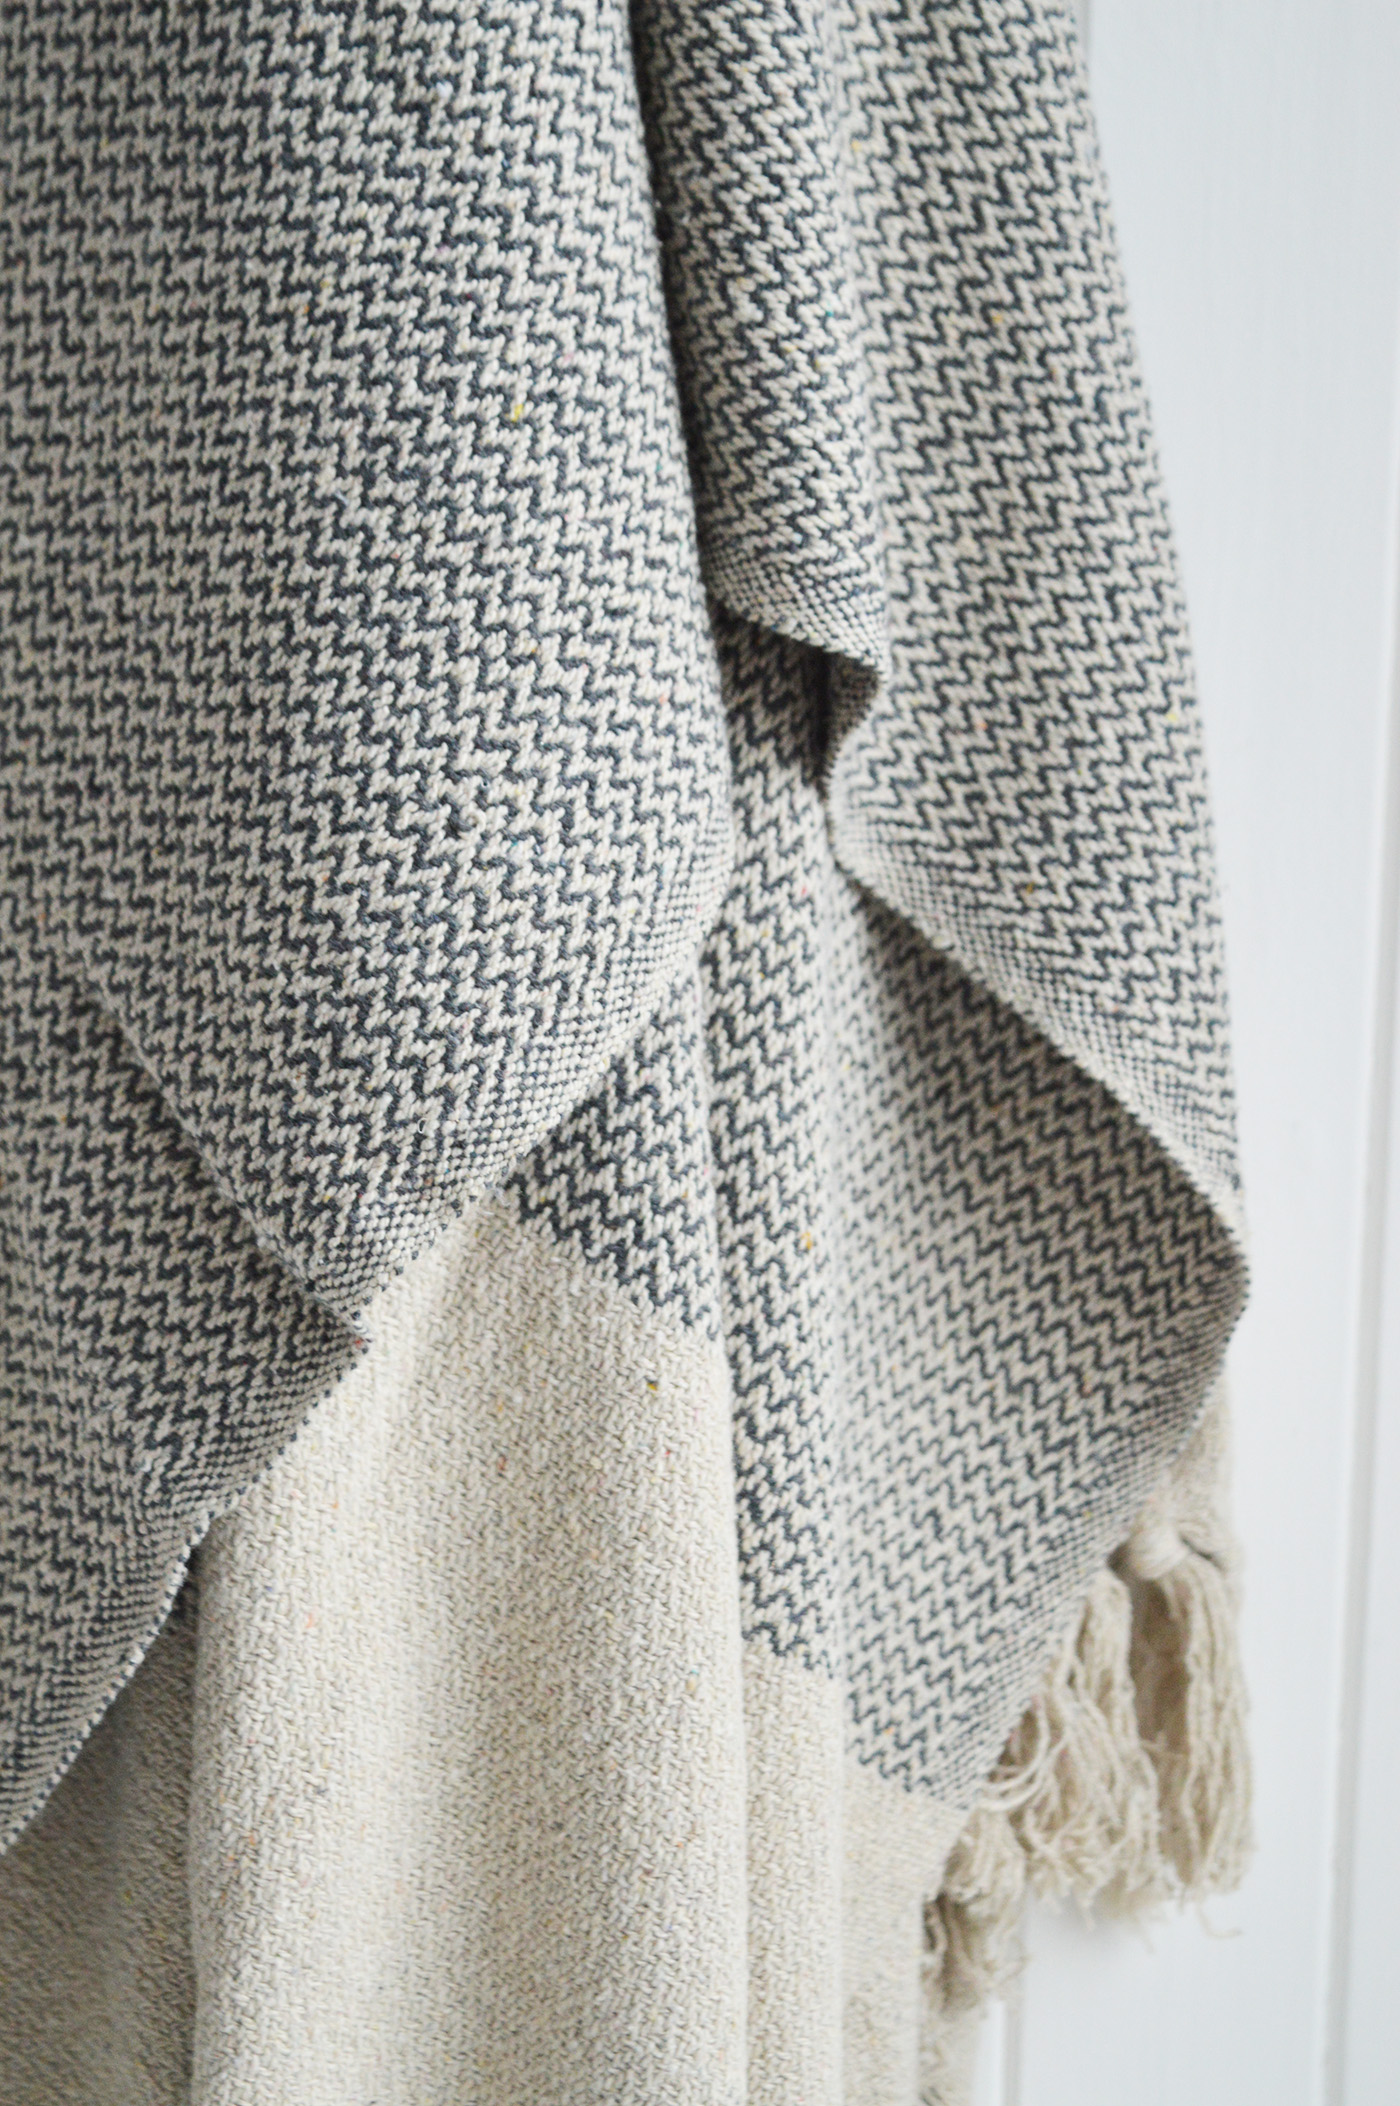 Stowe Throws, blankets for New England Style Interiors